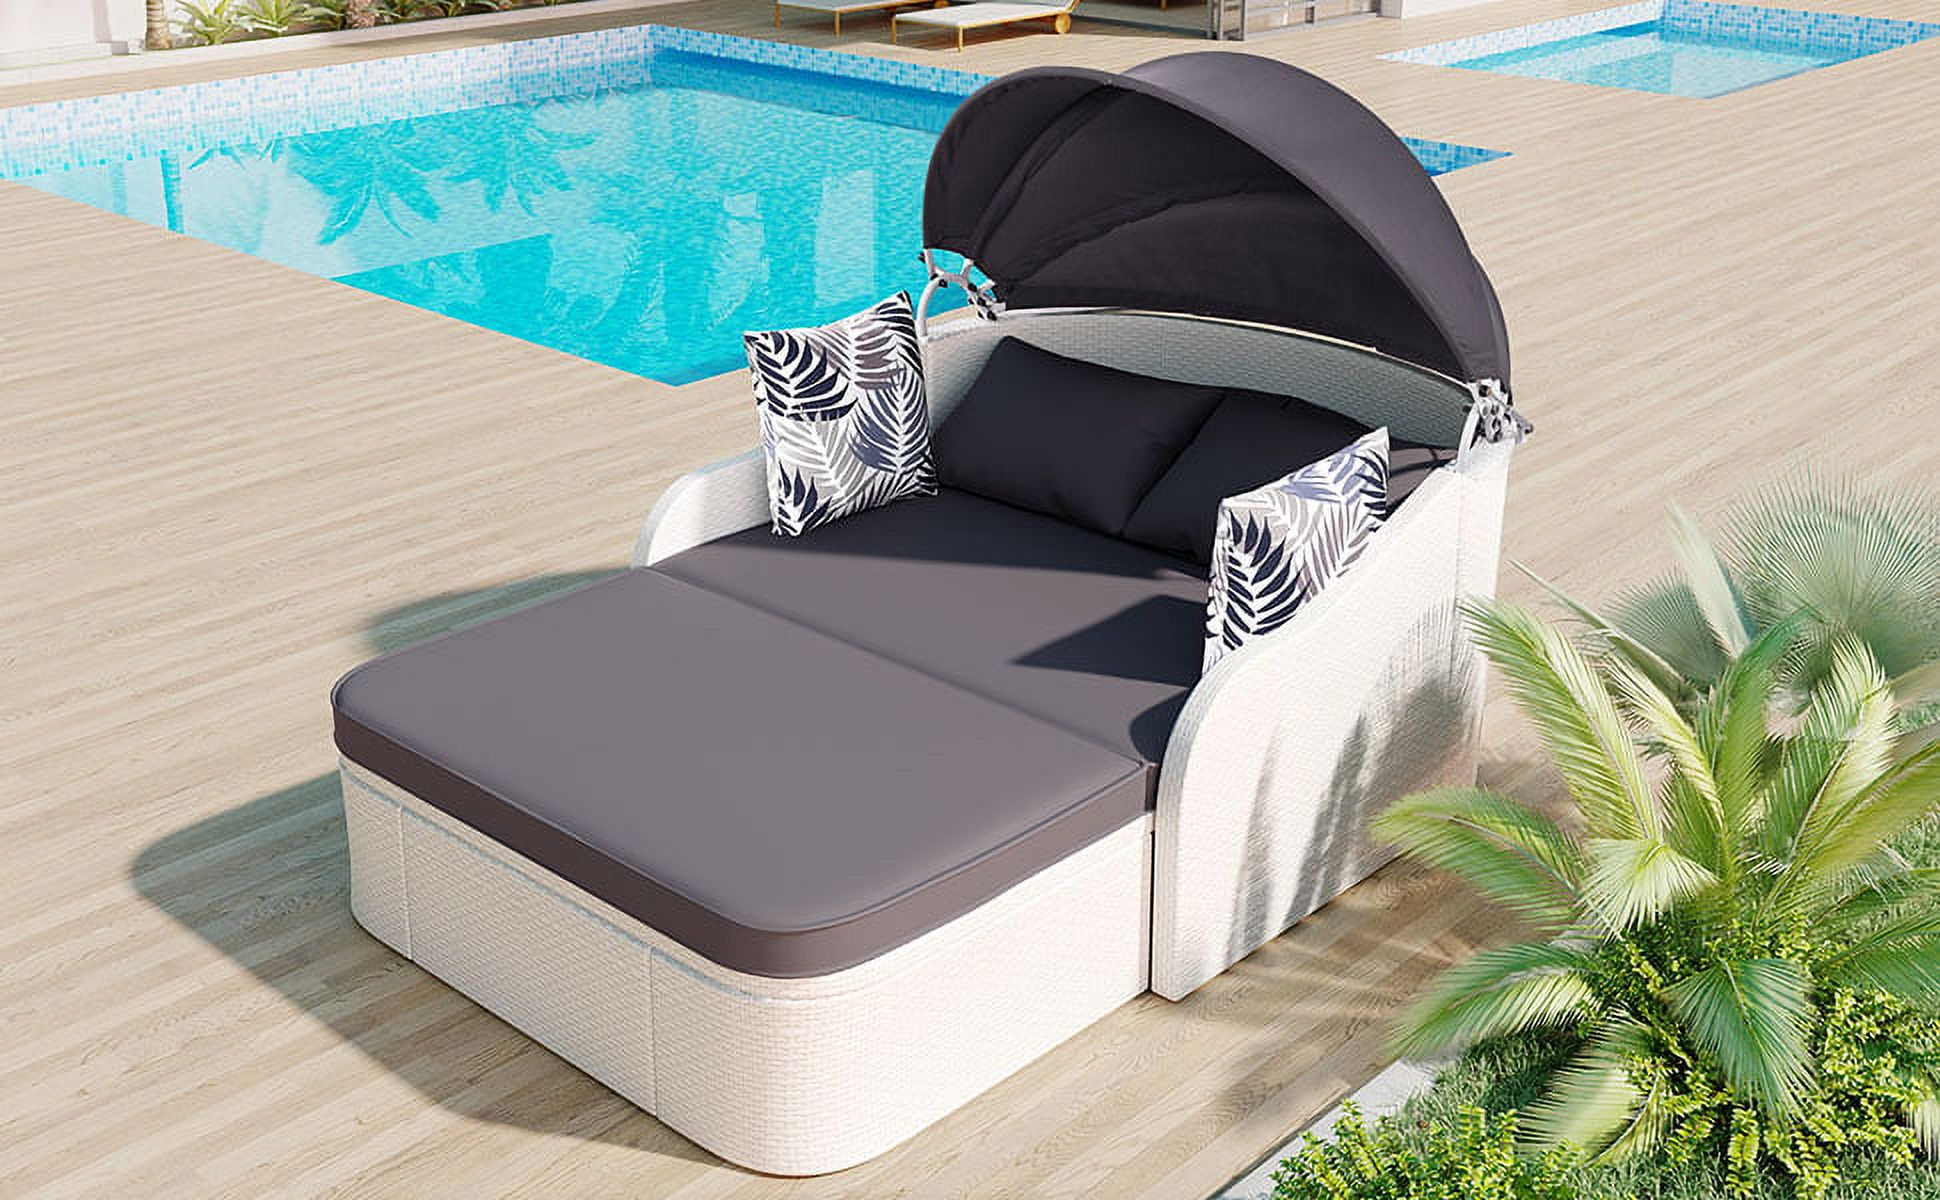 Seizeen Outdoor Rattan Chaise Lounge, 2-Person Reclining Daybed with Adjustable Canopy and Gray Cushions, Multifunction PE Wicker Furniture w/ Cover, White - image 2 of 13